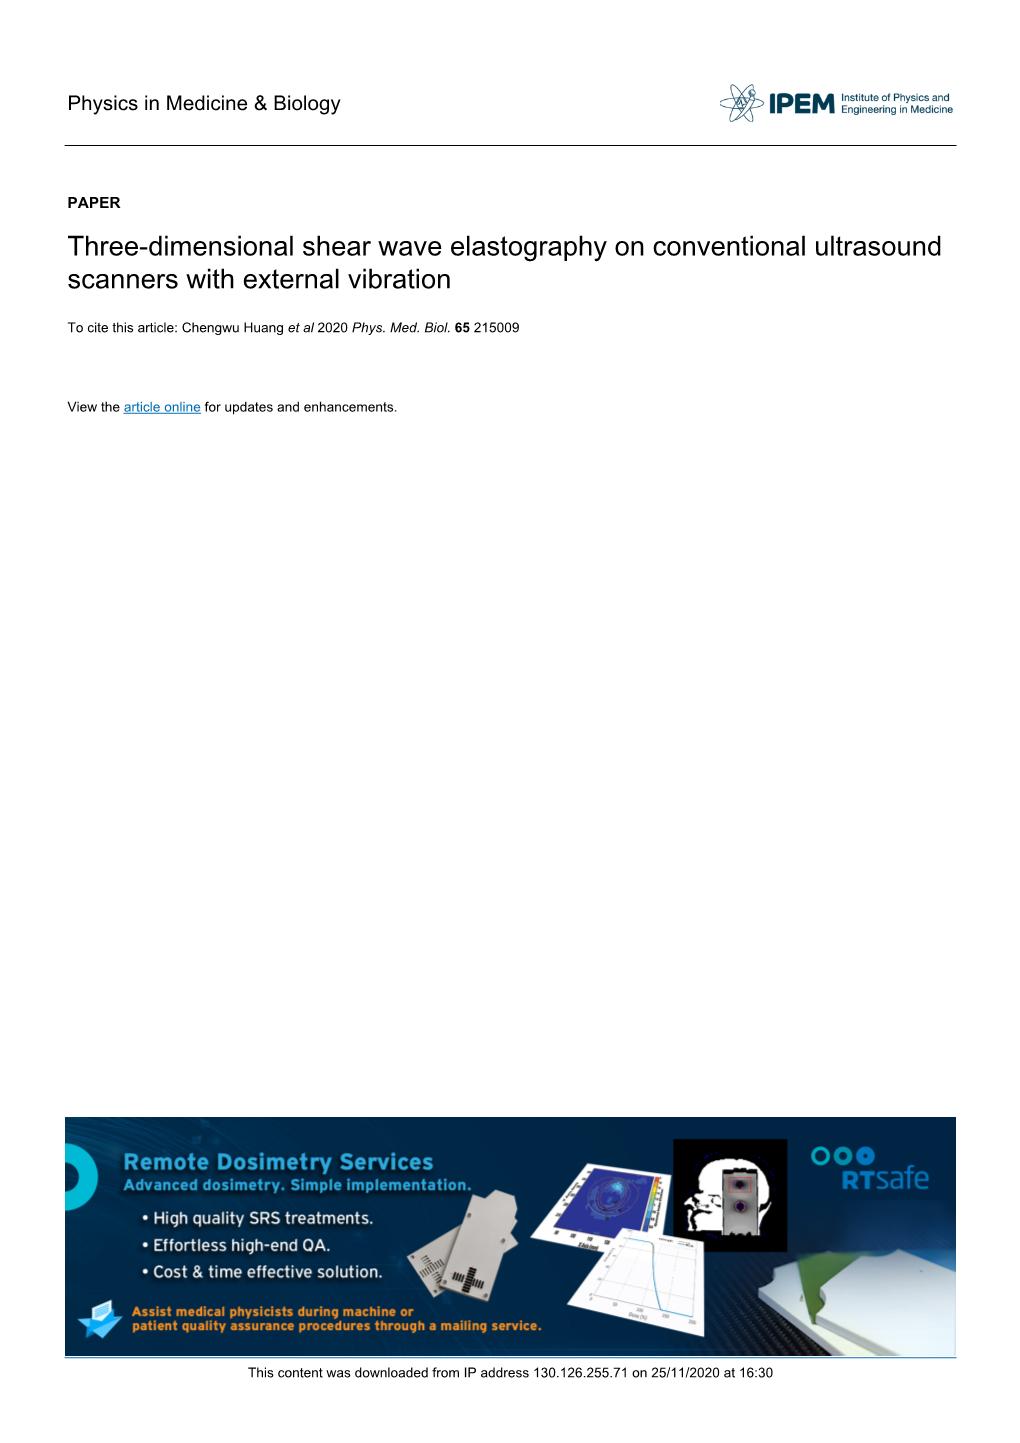 Three-Dimensional Shear Wave Elastography on Conventional Ultrasound Scanners with External Vibration